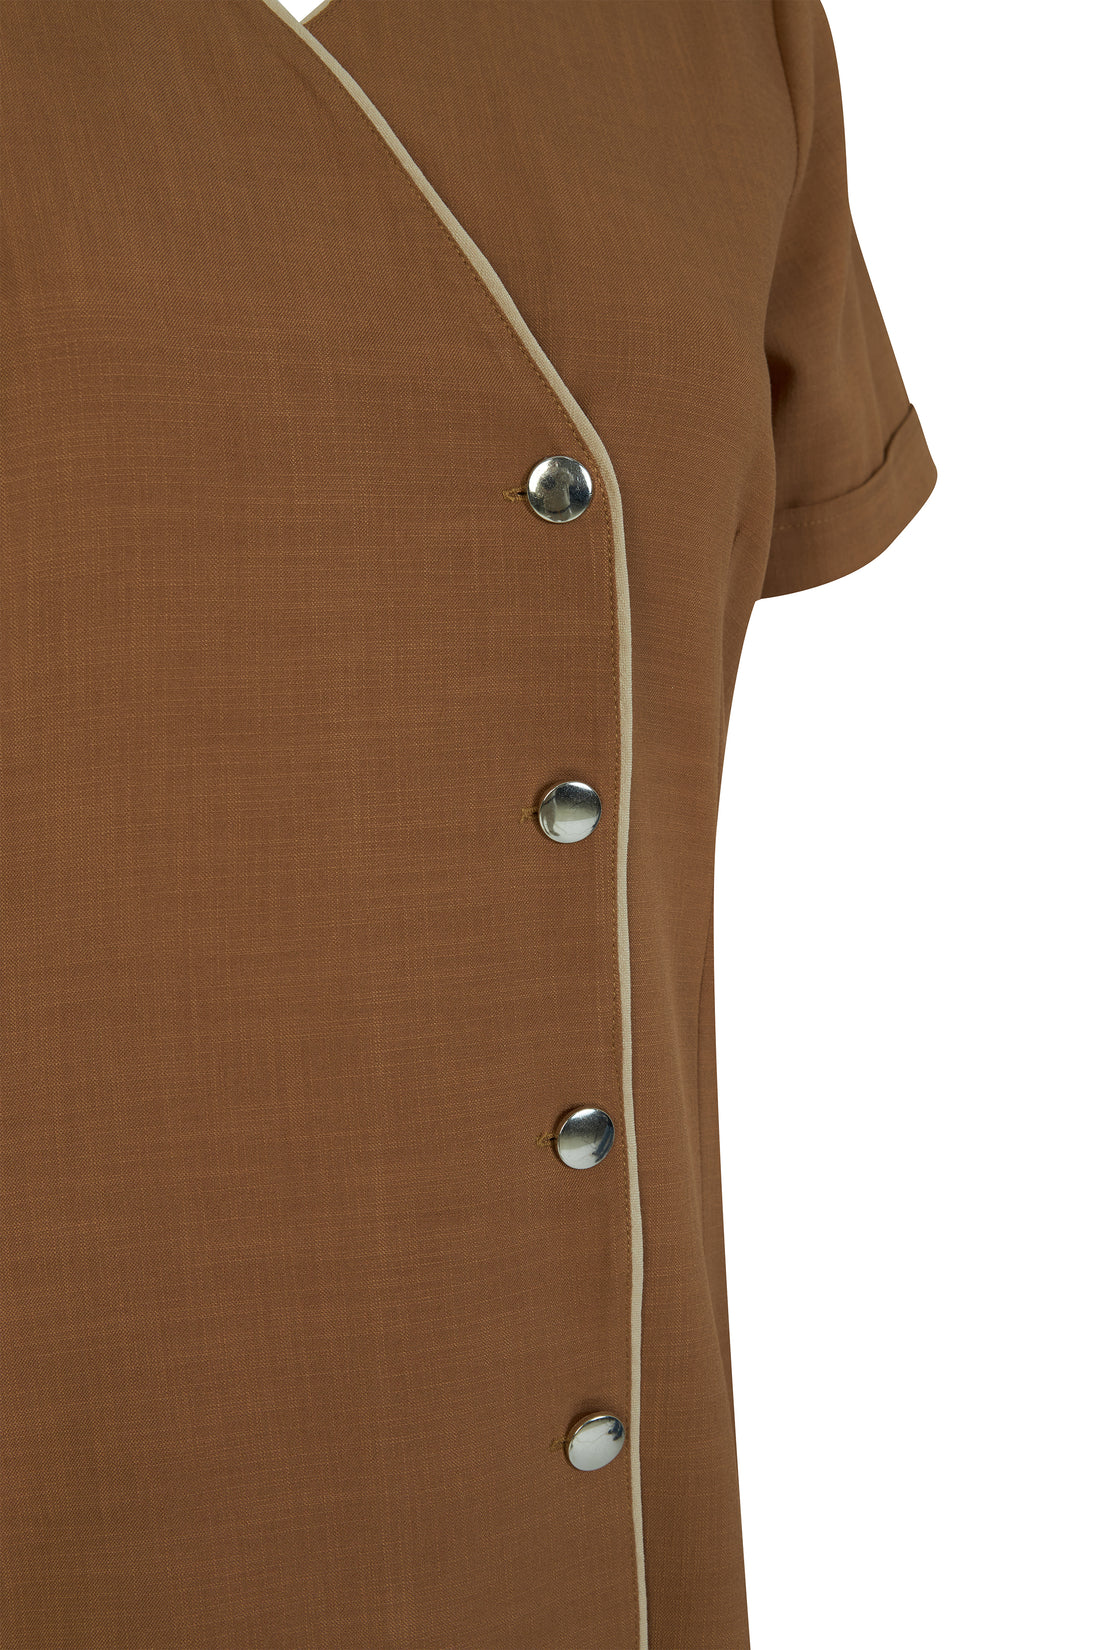 Lucy Spa Therapist and Attendant Uniform in Mocha Brown with Button  Detail